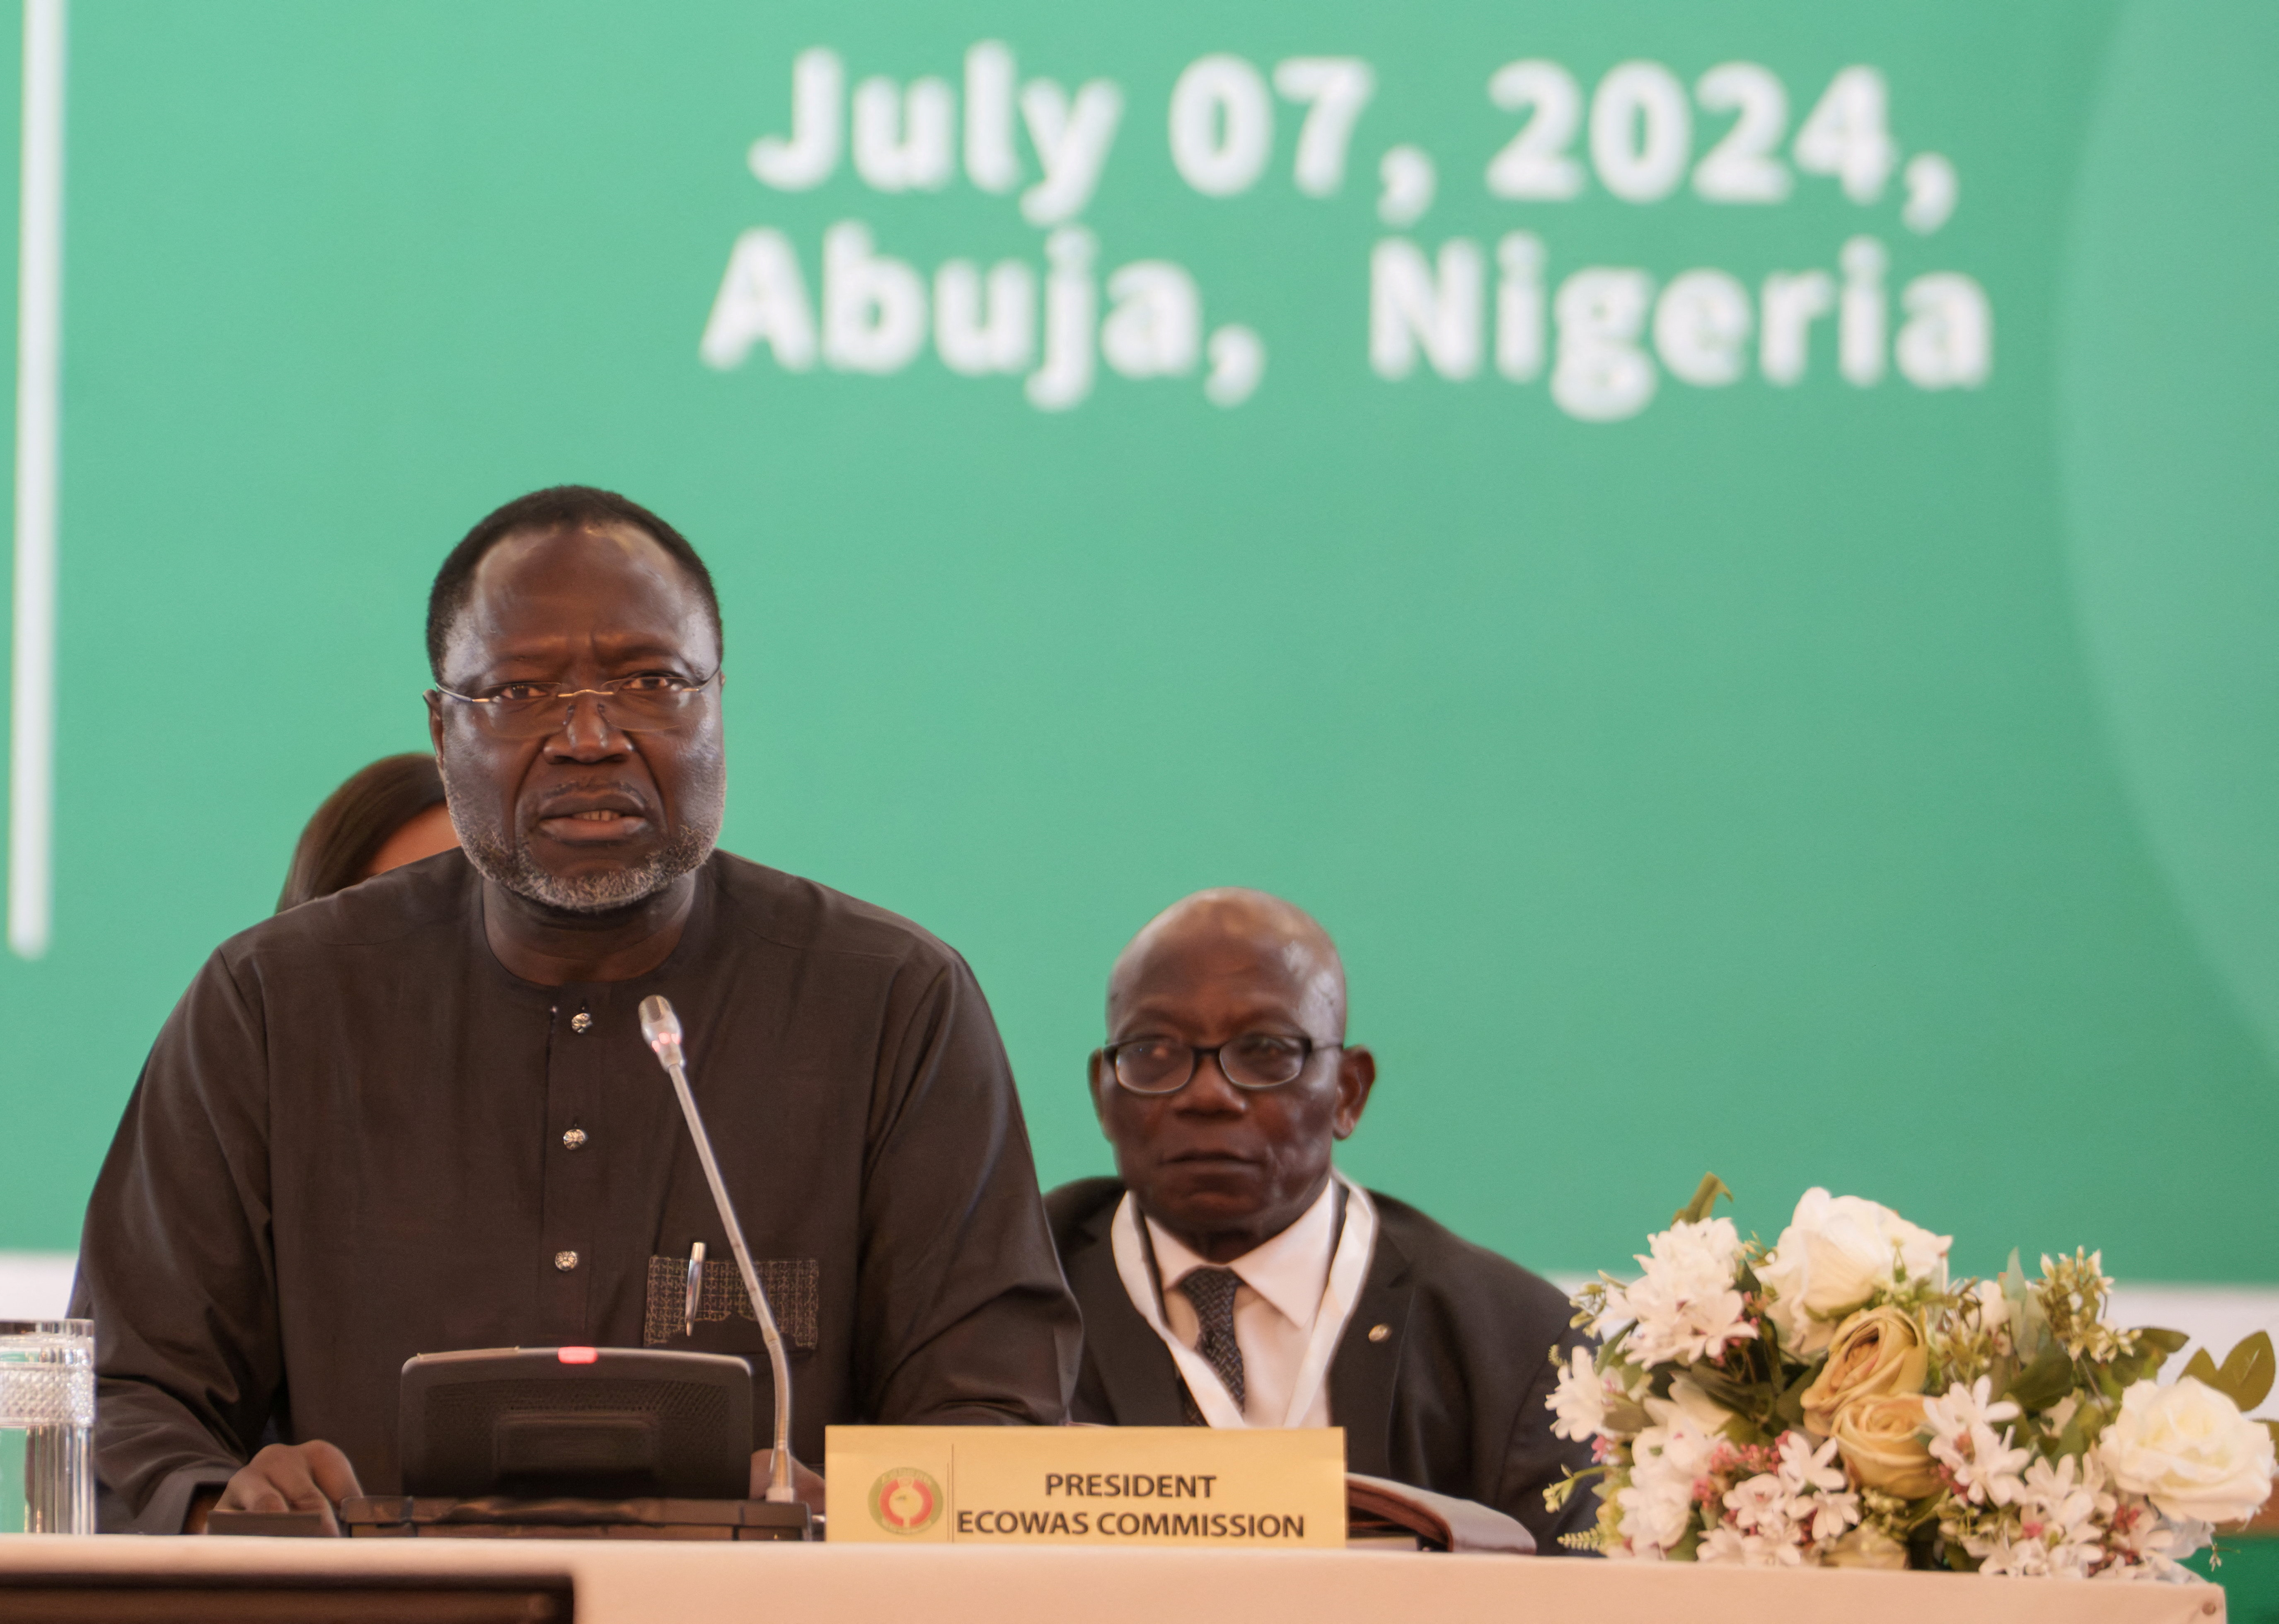 Leaders from West African bloc ECOWAS meet at summit in Abuja